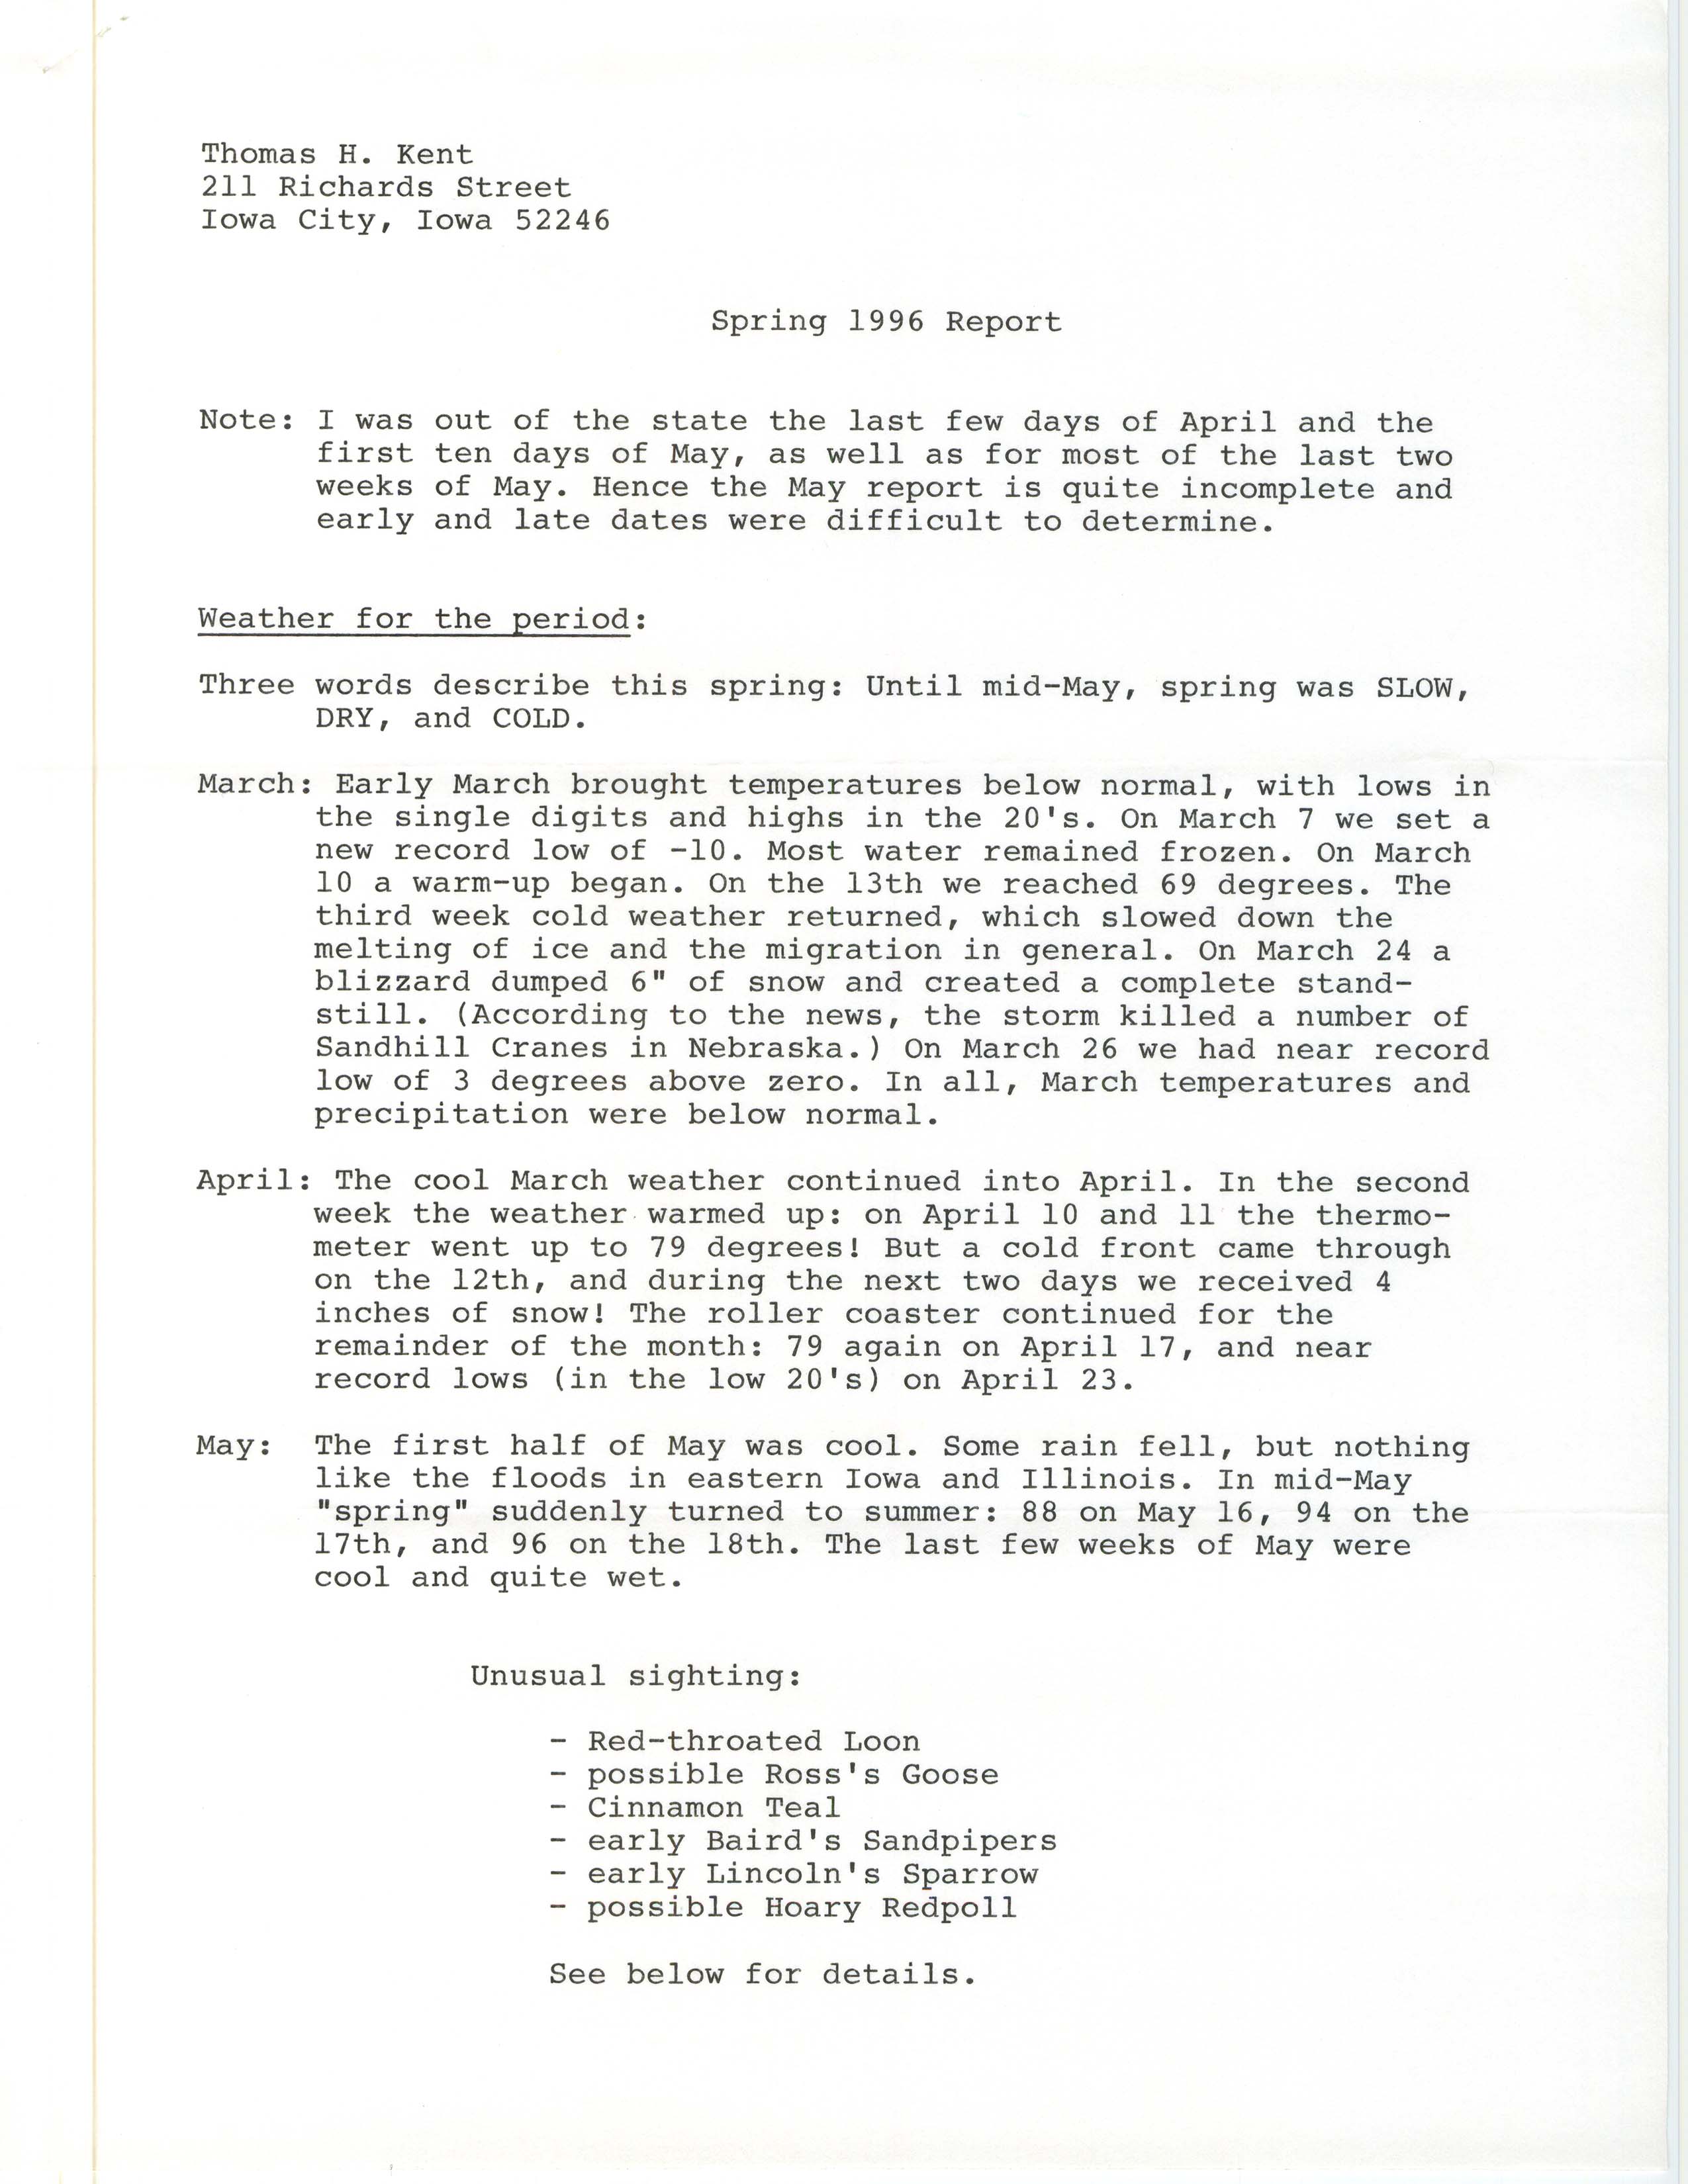 Field notes contributed by John Van Dyk, spring 1996